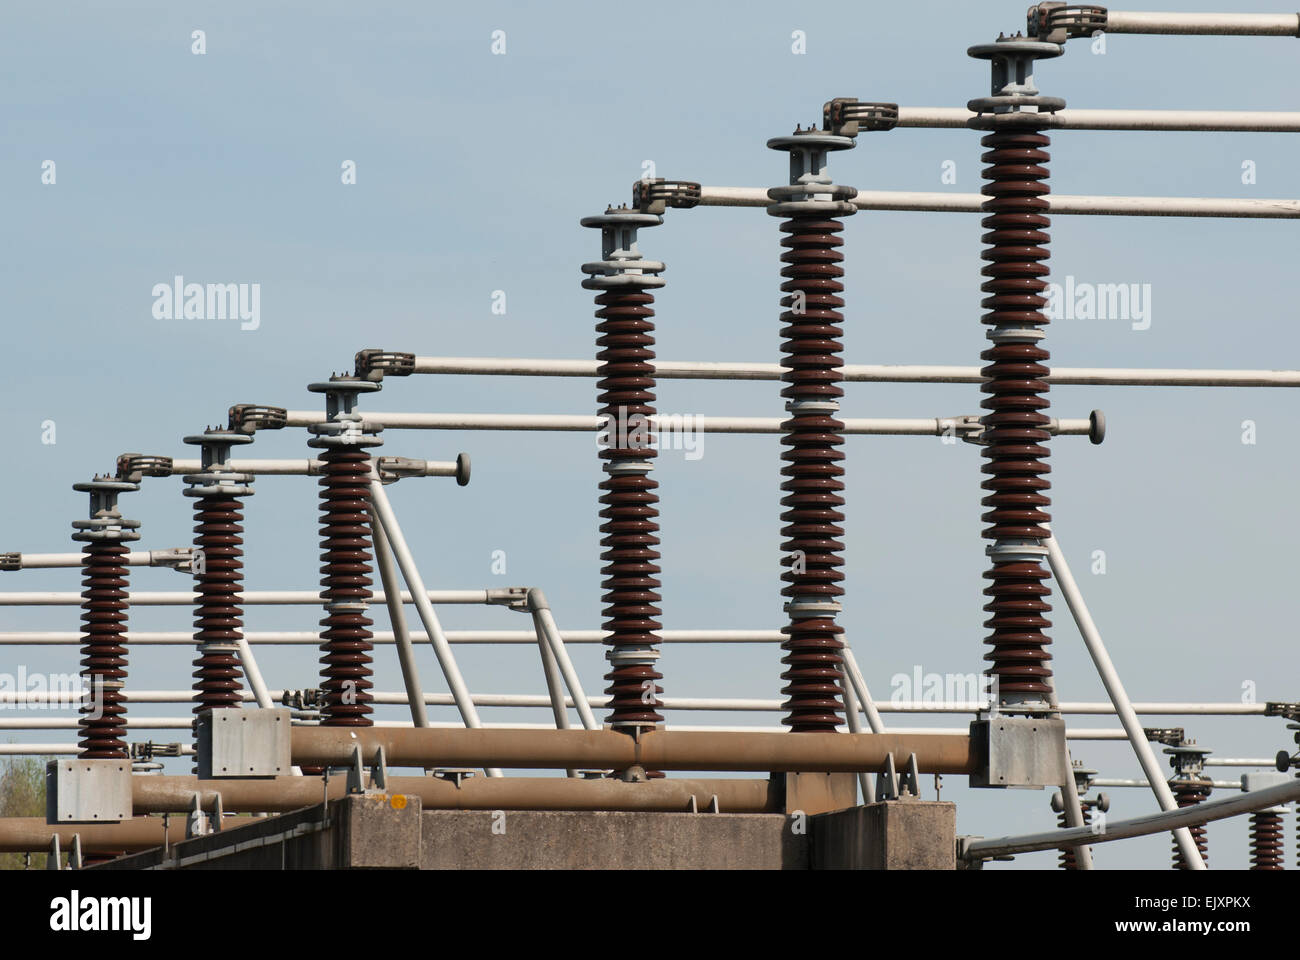 Electrical equipment at transformer substation Stock Photo